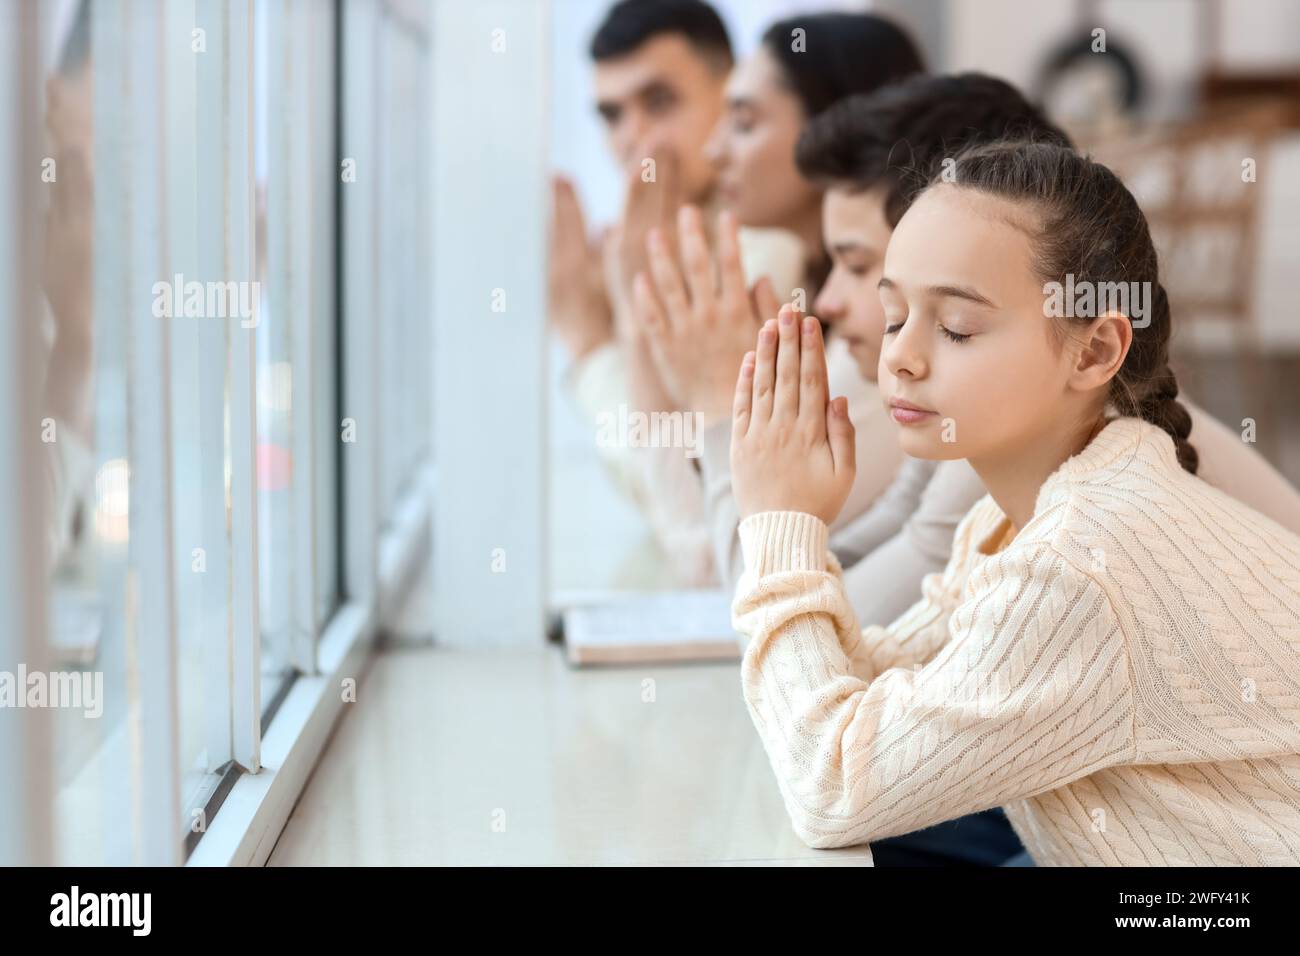 Little girl praying with her family near window at home, closeup Stock Photo